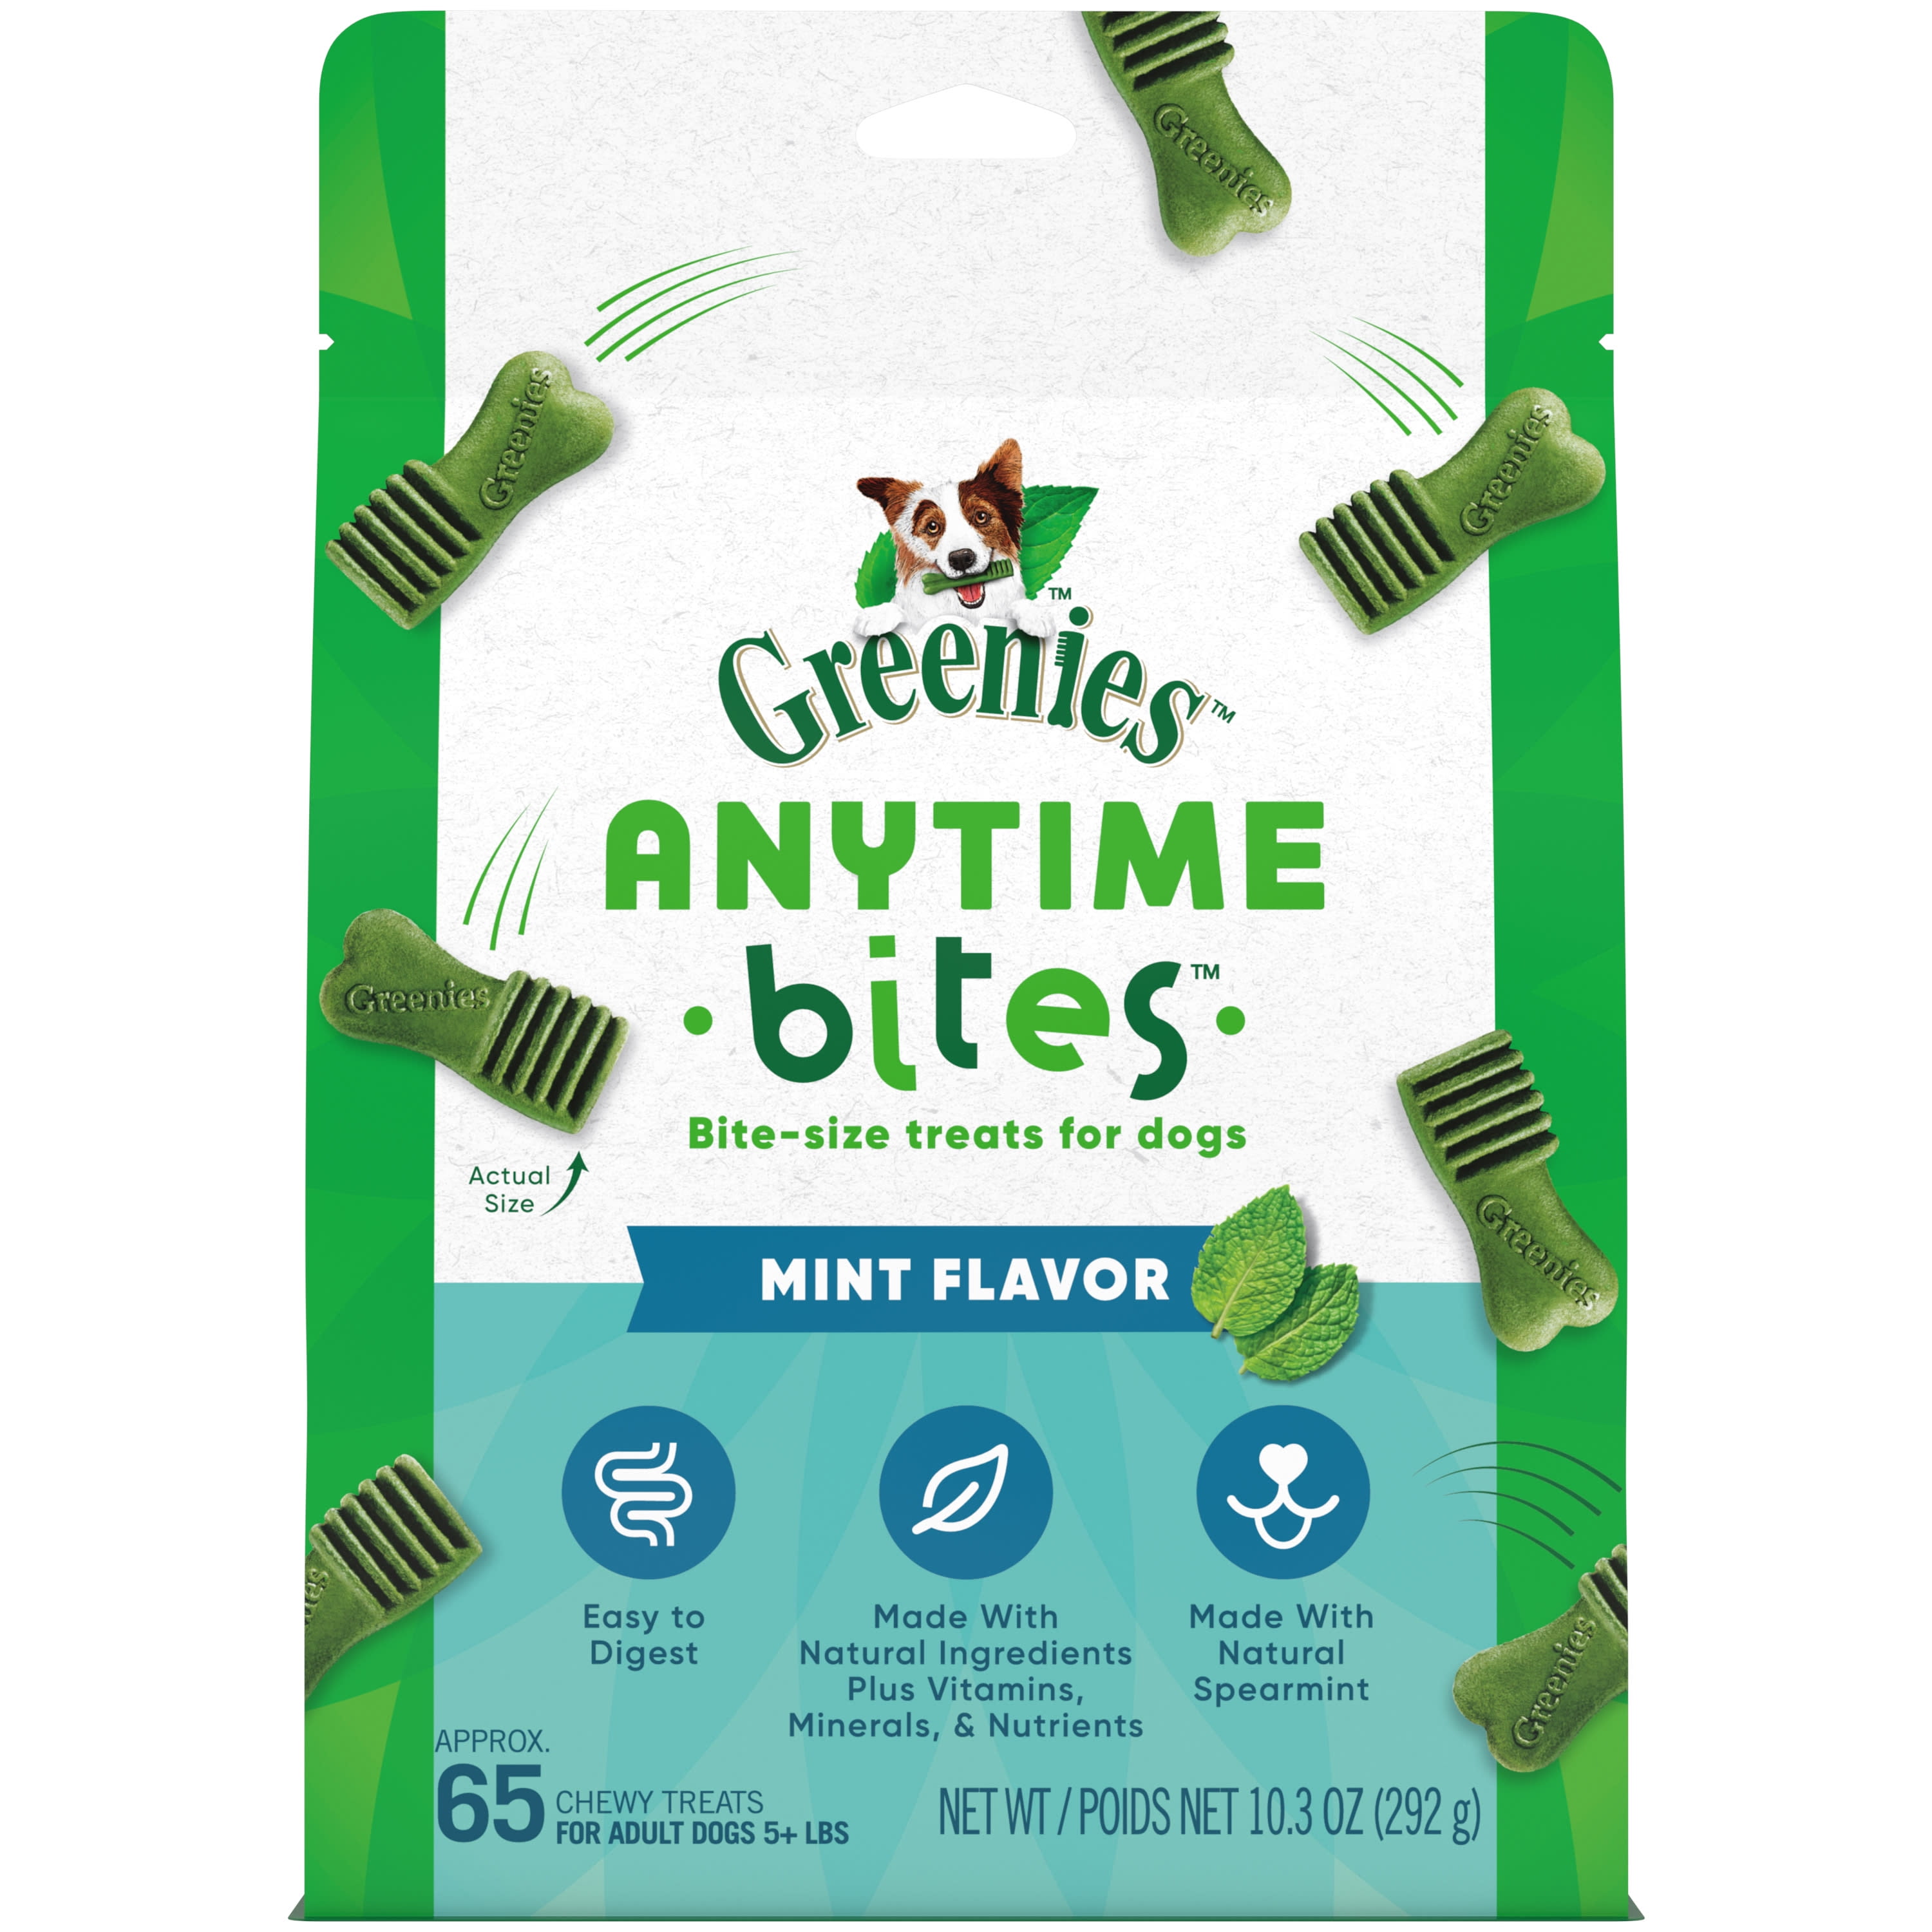 GREENIES ANYTIME BITES Mint Flavor Bite-Size Dental Chew Treats for Dogs, 10.3 oz. Pouch